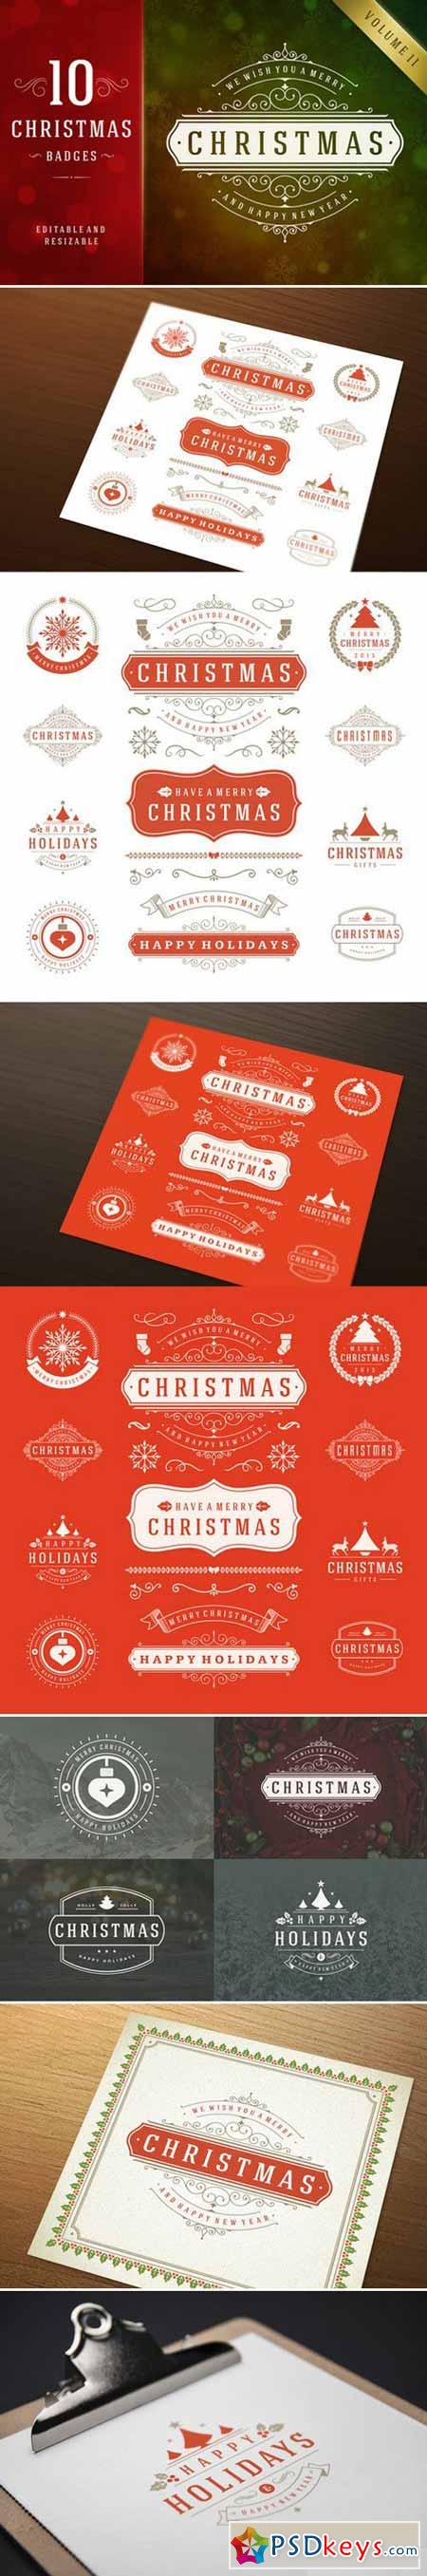 10 Christmas labels and badges 431297